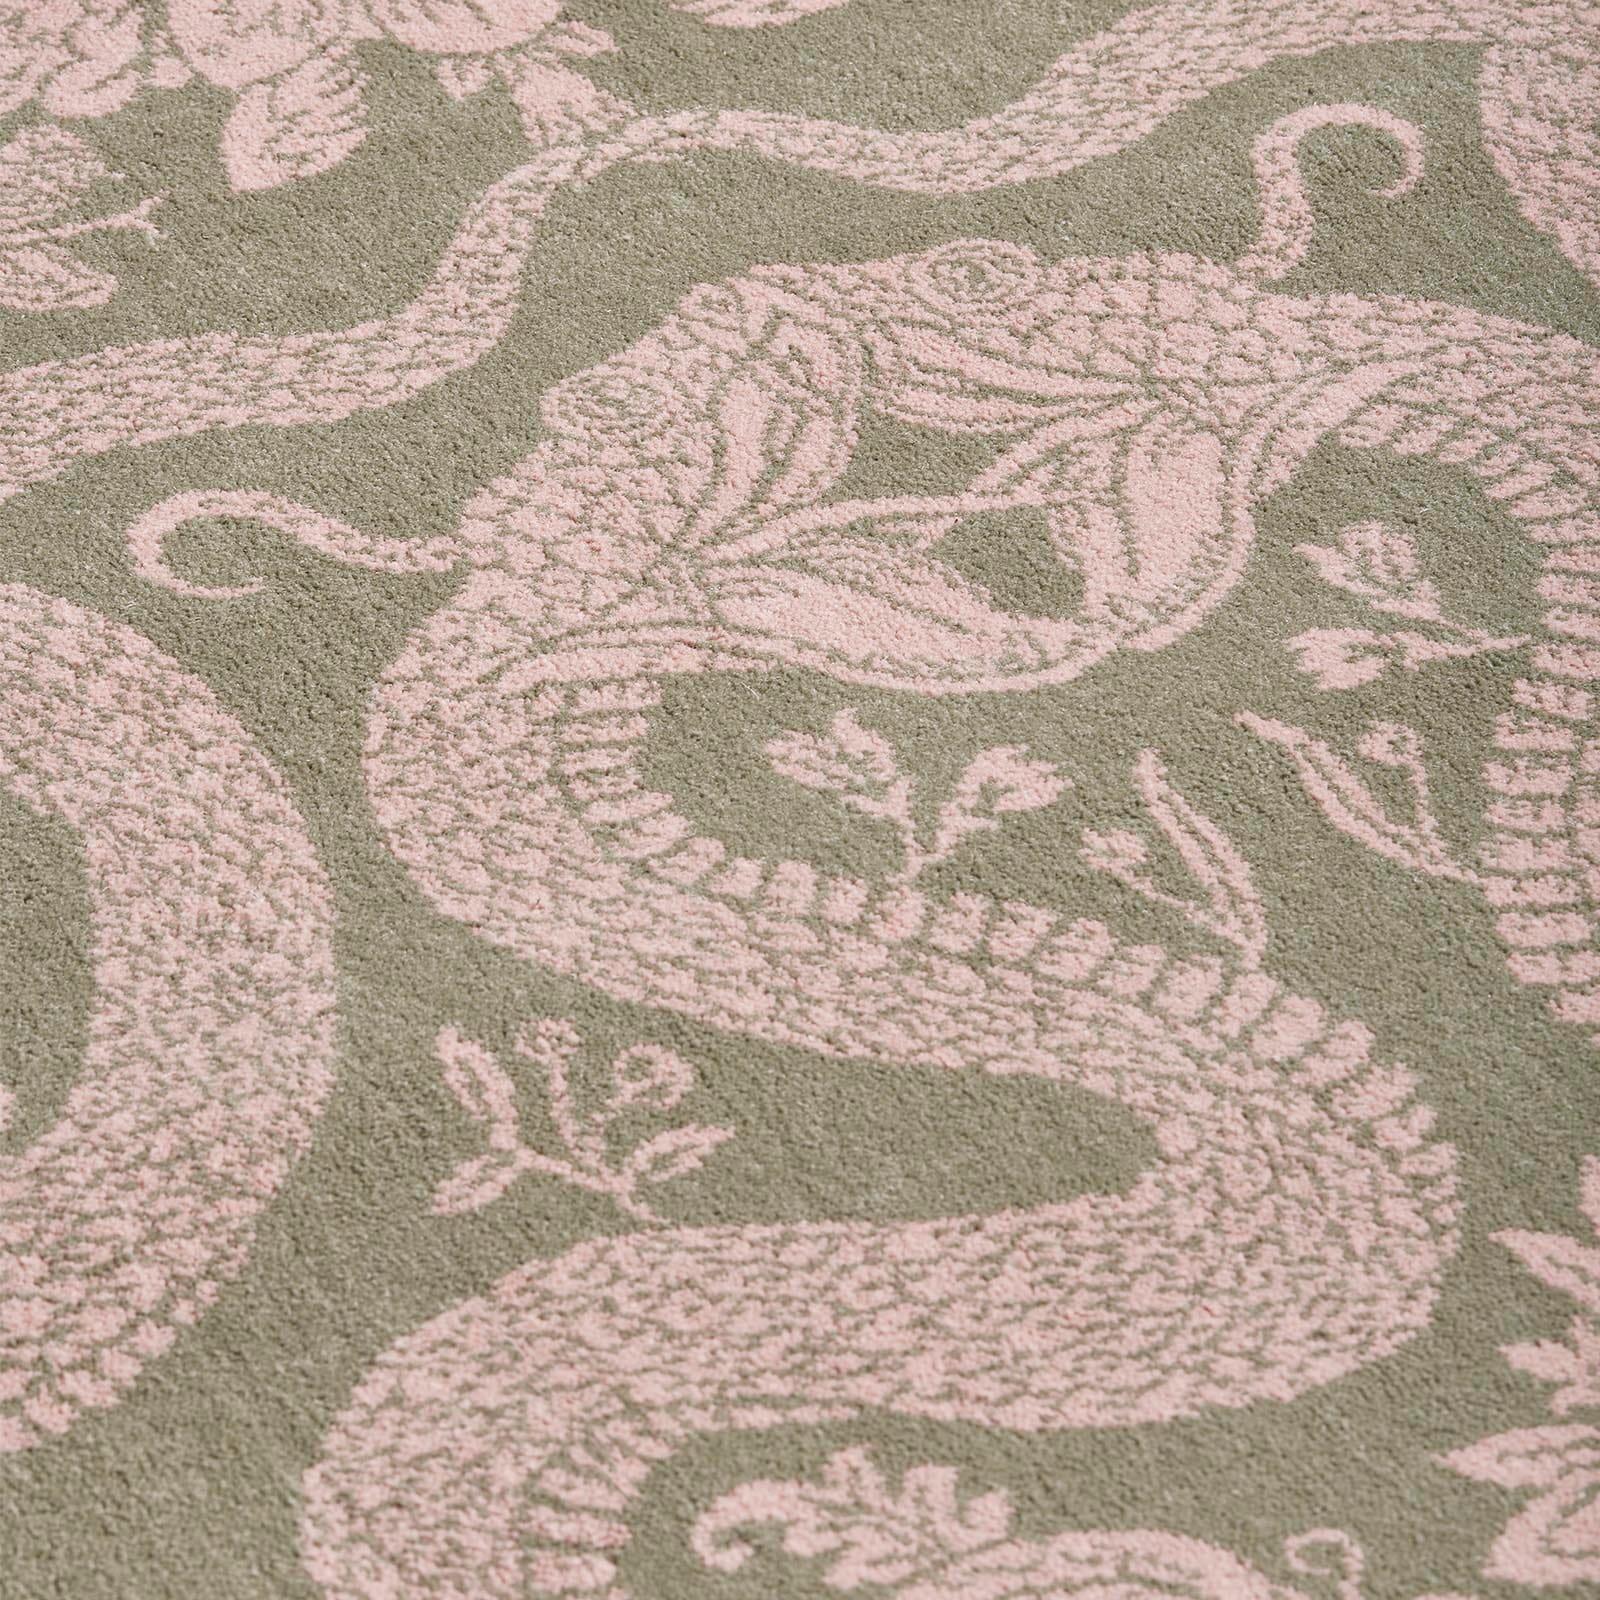 Fear not the snakes slithering across the floor of your home, for these are our House symbols of transformation and renewal. In an elegant palette of sage-green and dusky-pink, the subversively beautiful ANACONDA rug is woven by Axminster Carpets,